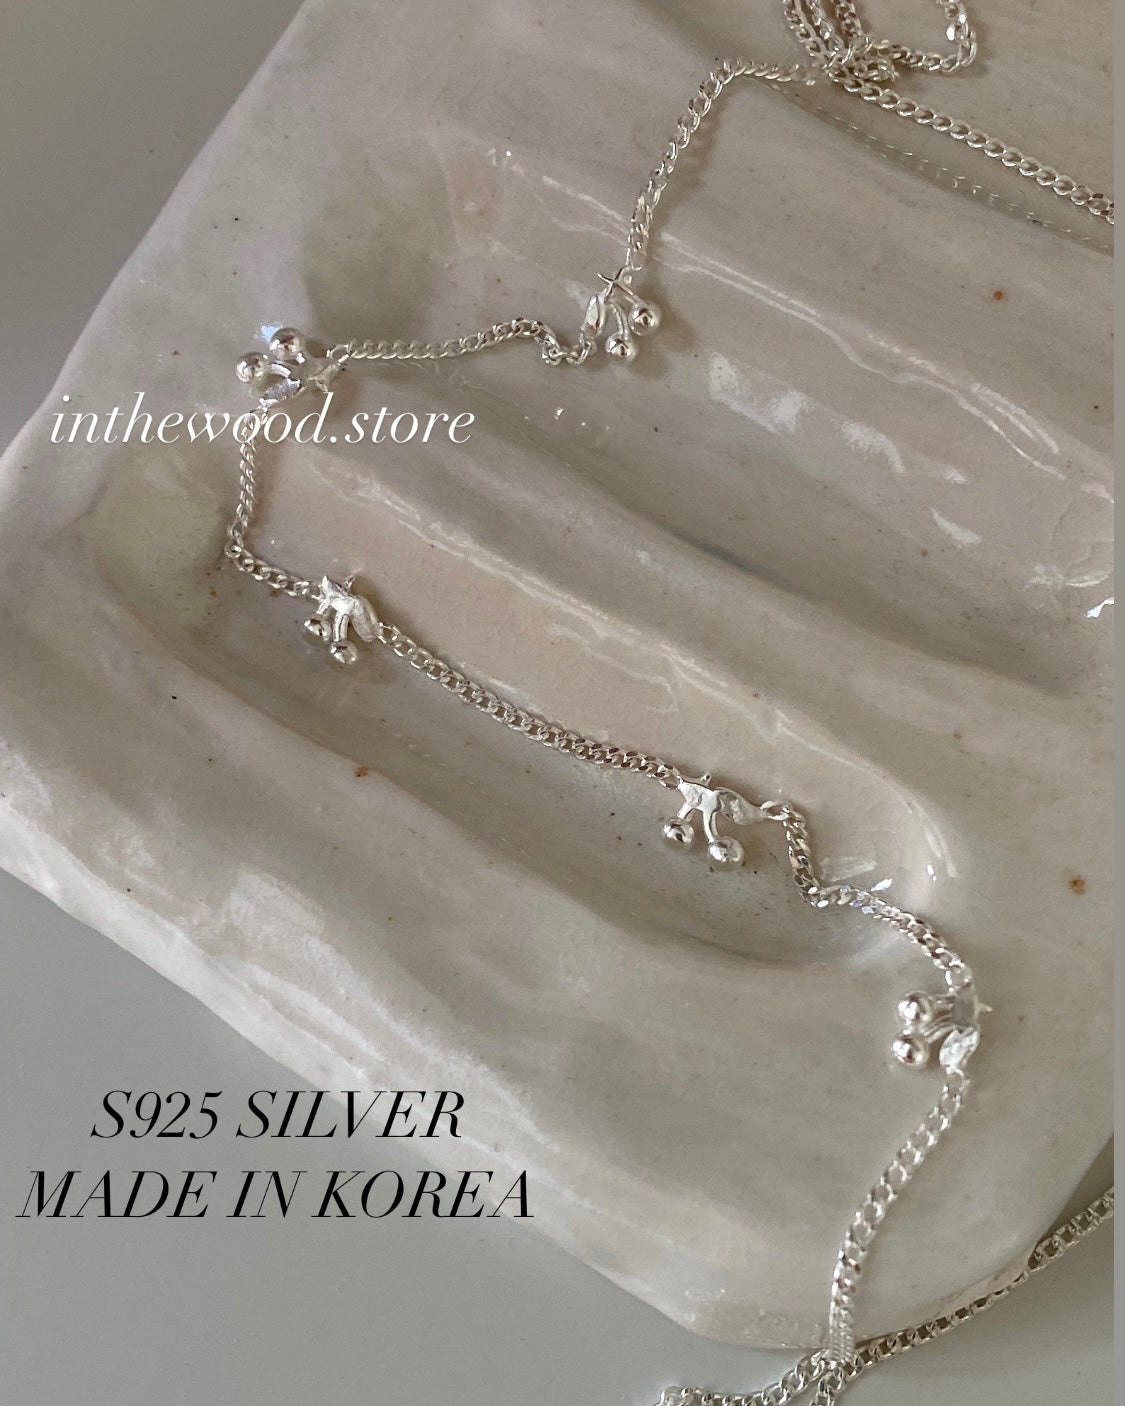 [925silver] Link Cherry Necklace